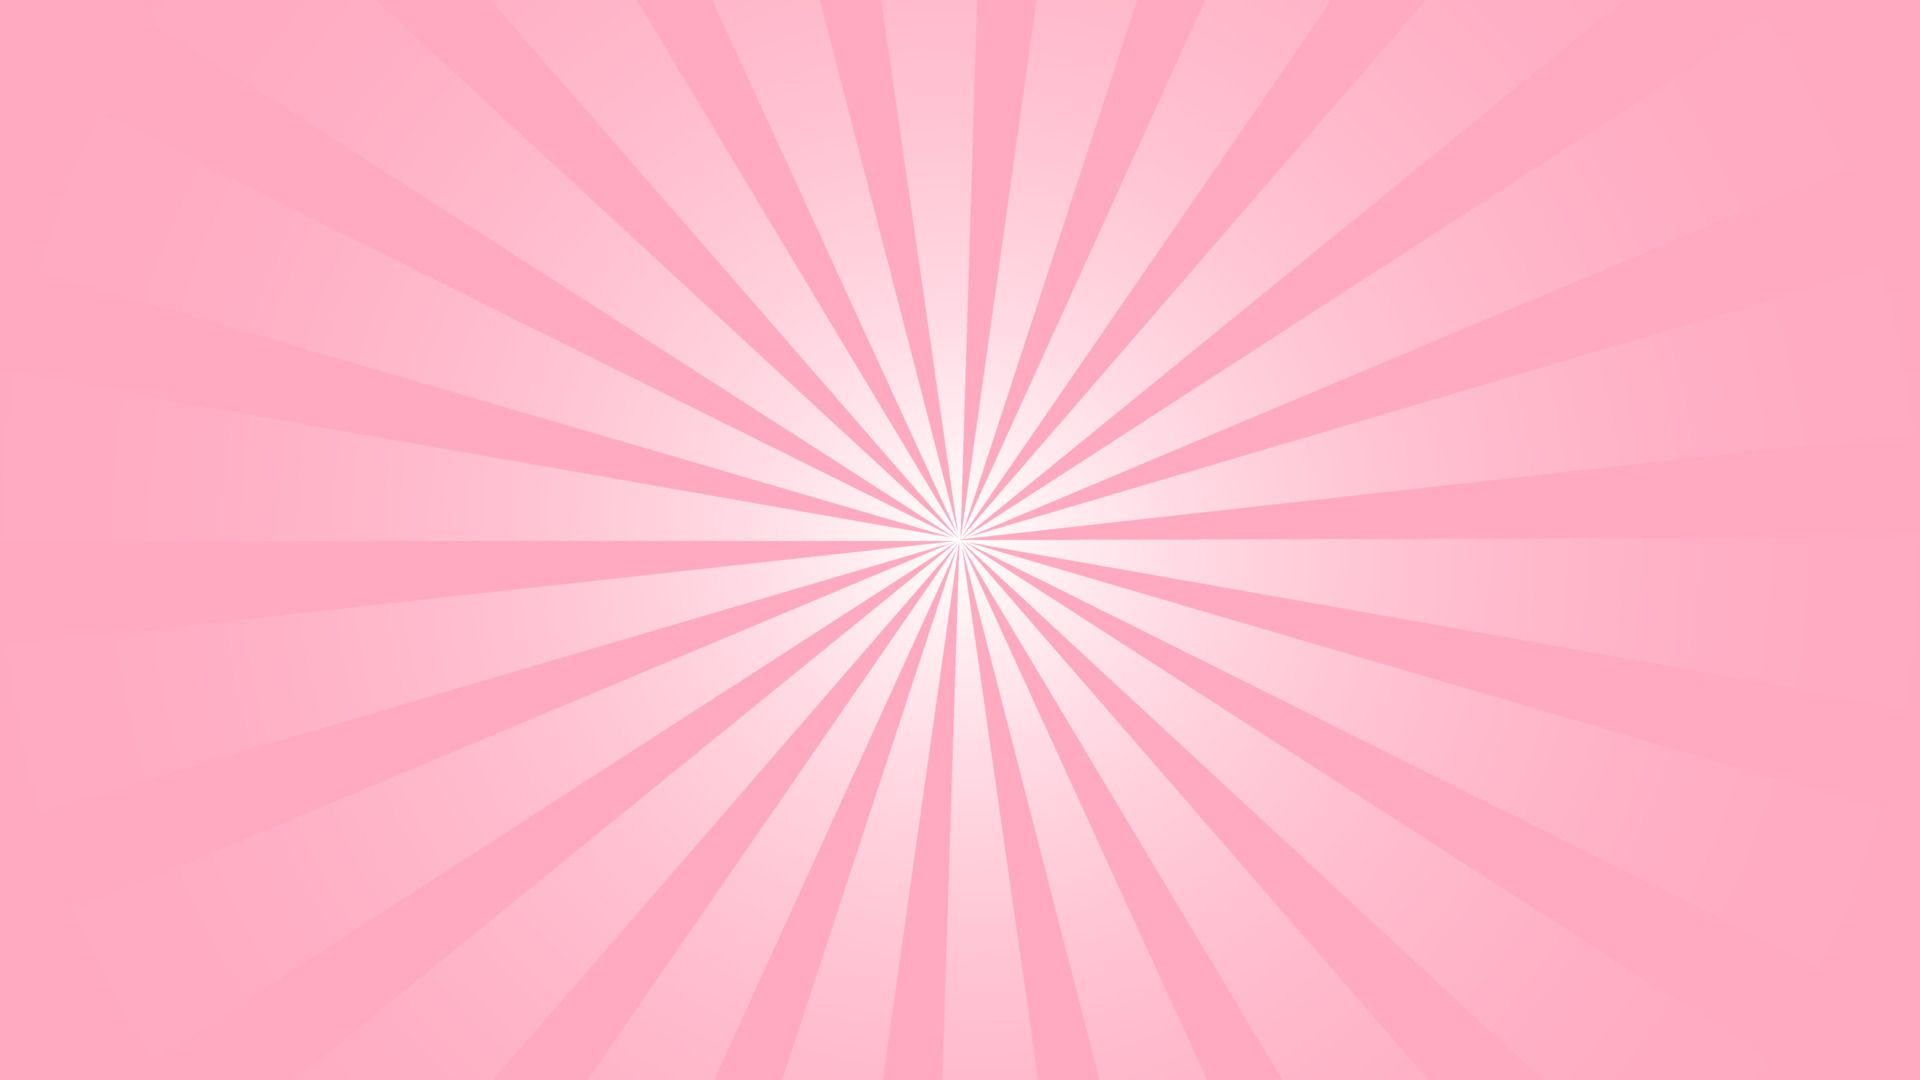 A pink and white sunburst background - Soft pink